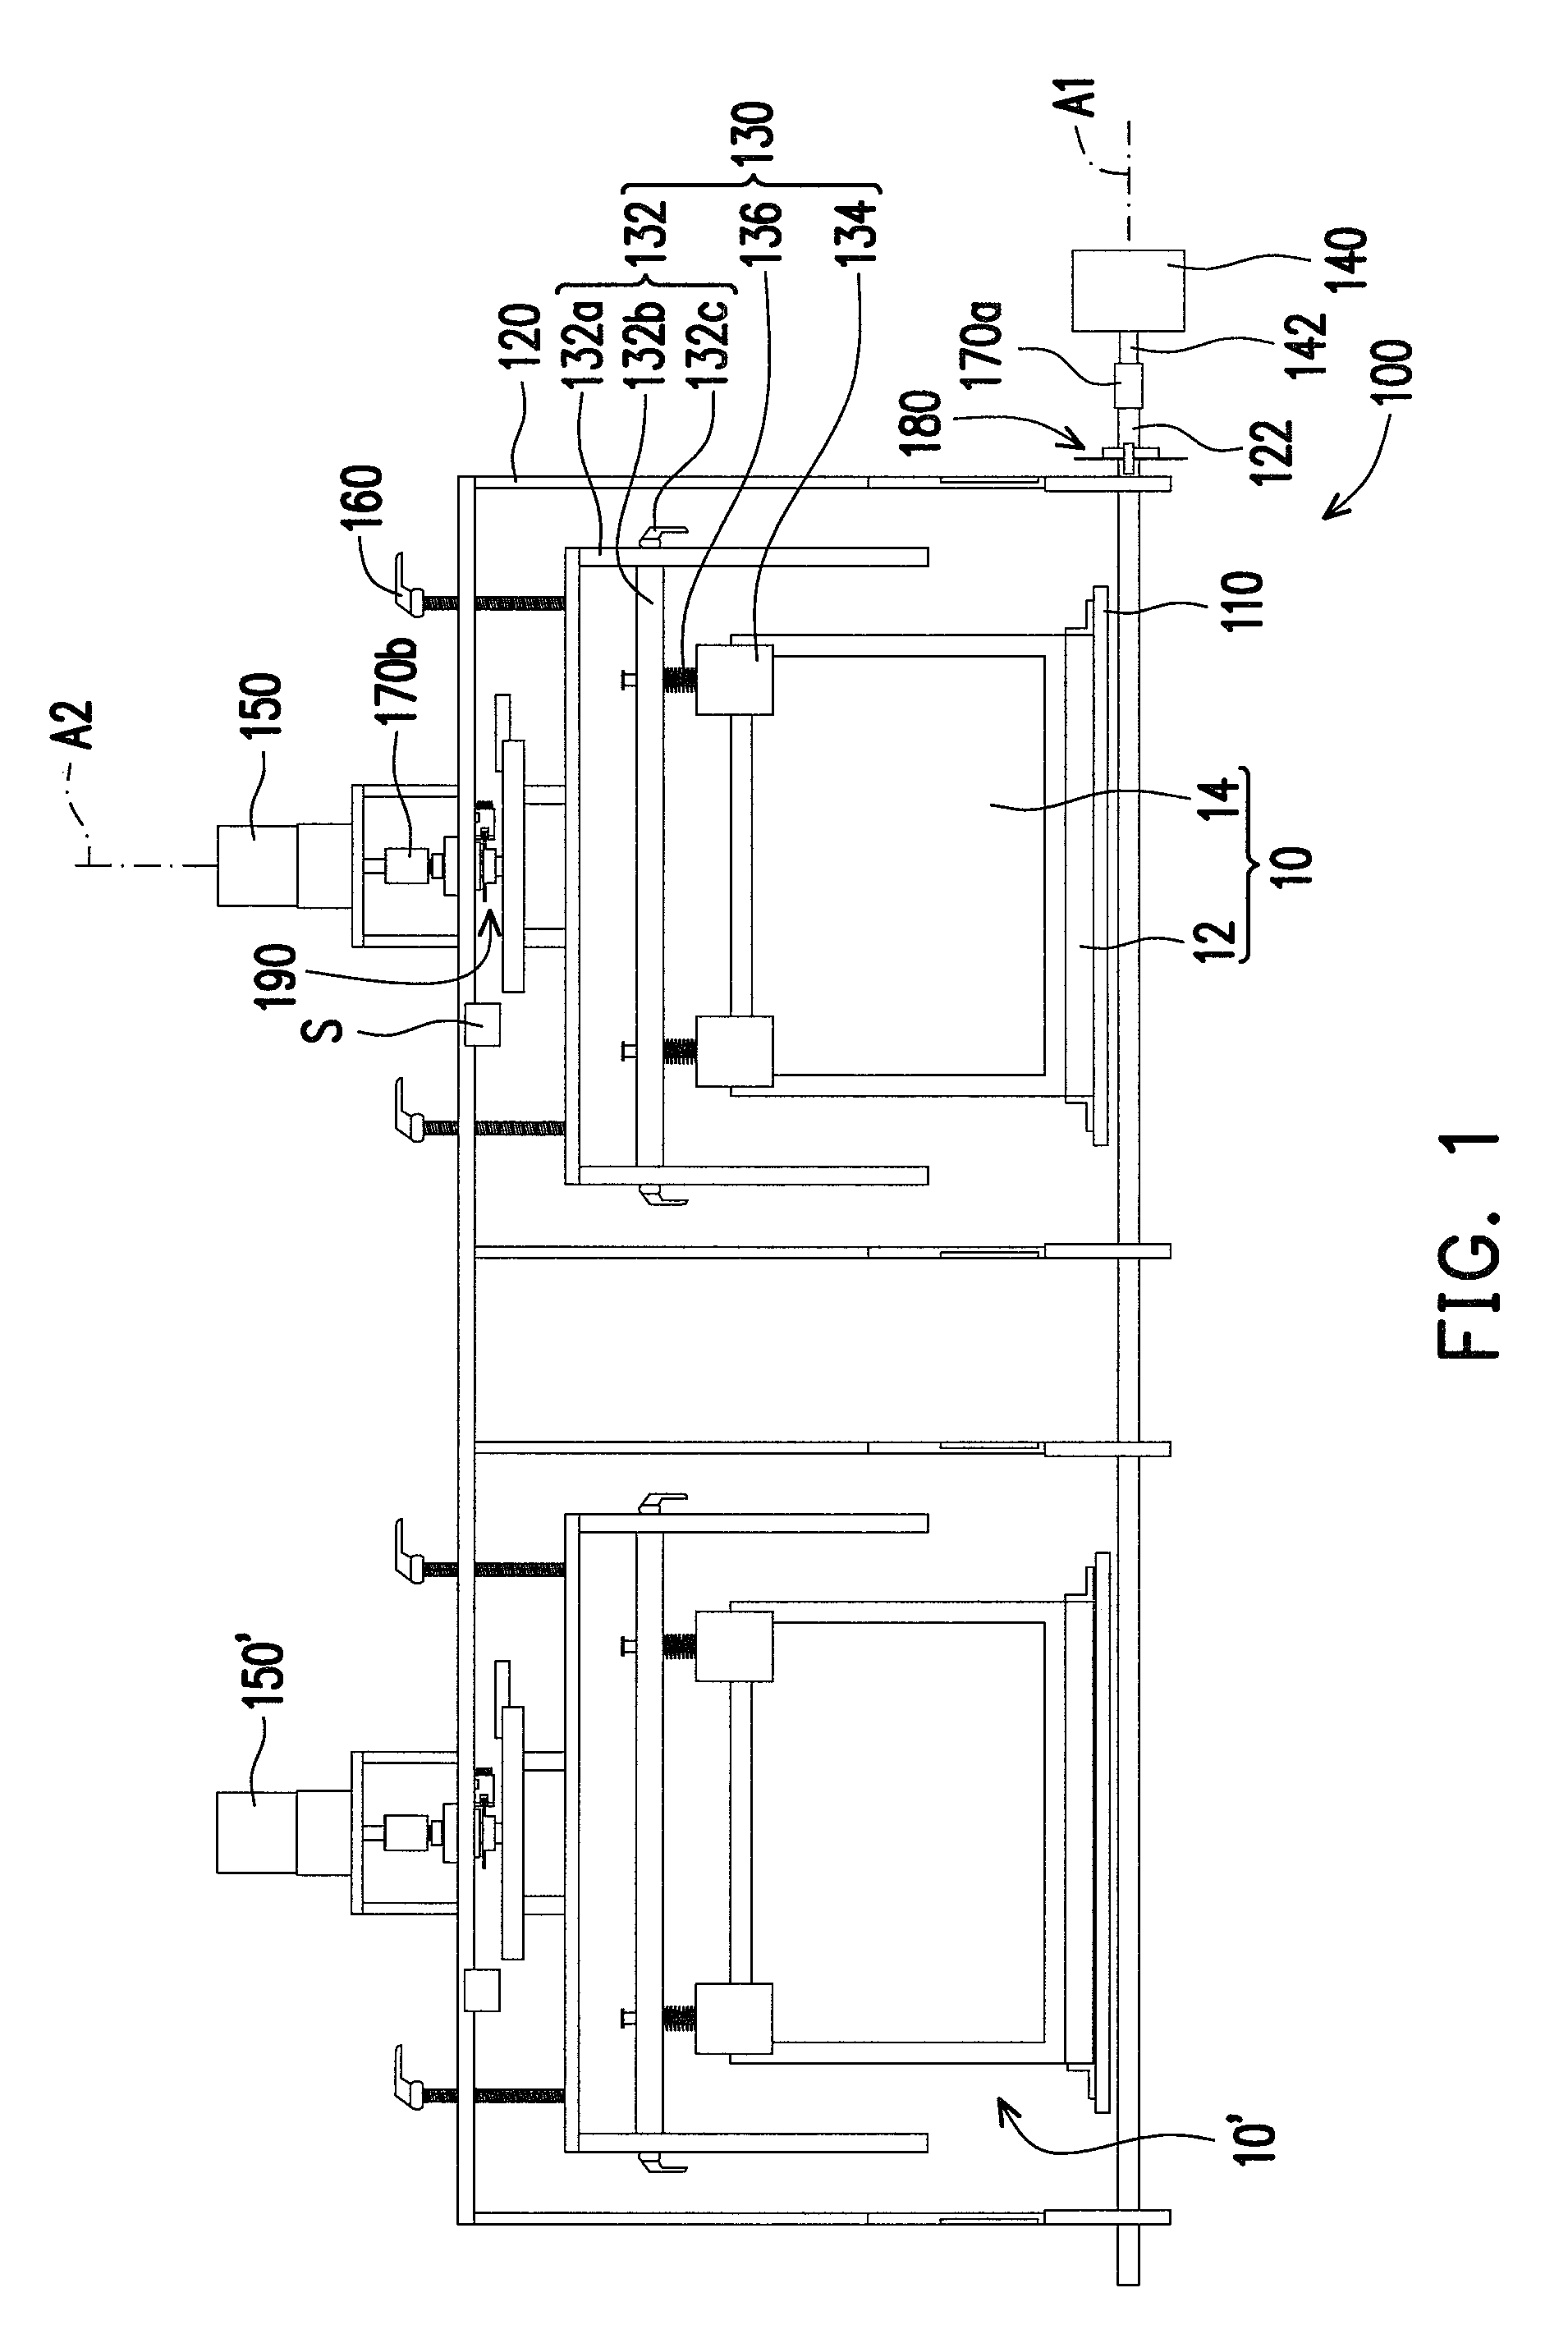 Testing device for an electronic device having two pivot points